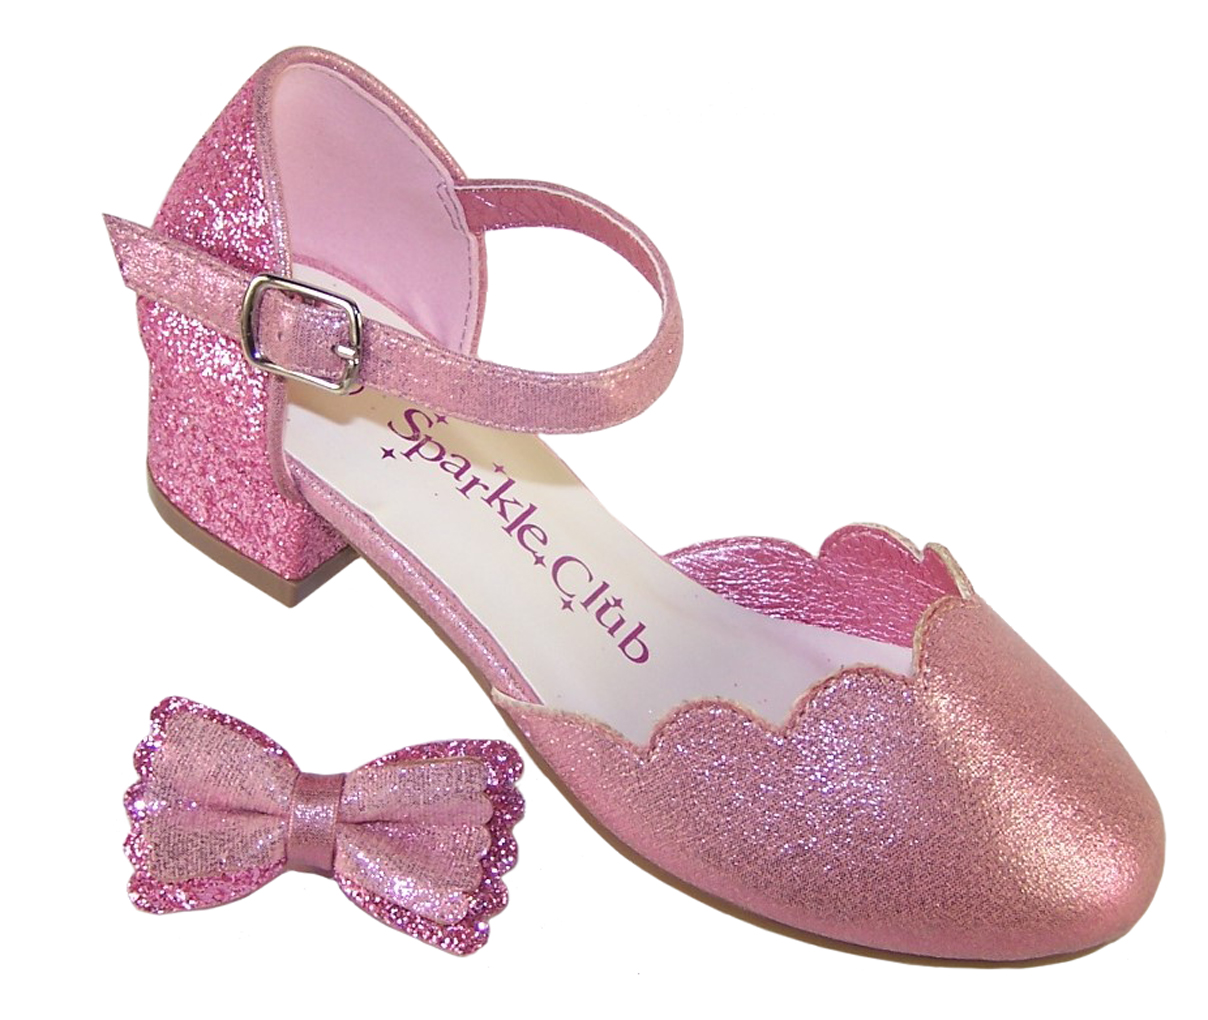 Girls pink sparkly glitter heeled party shoes-6415